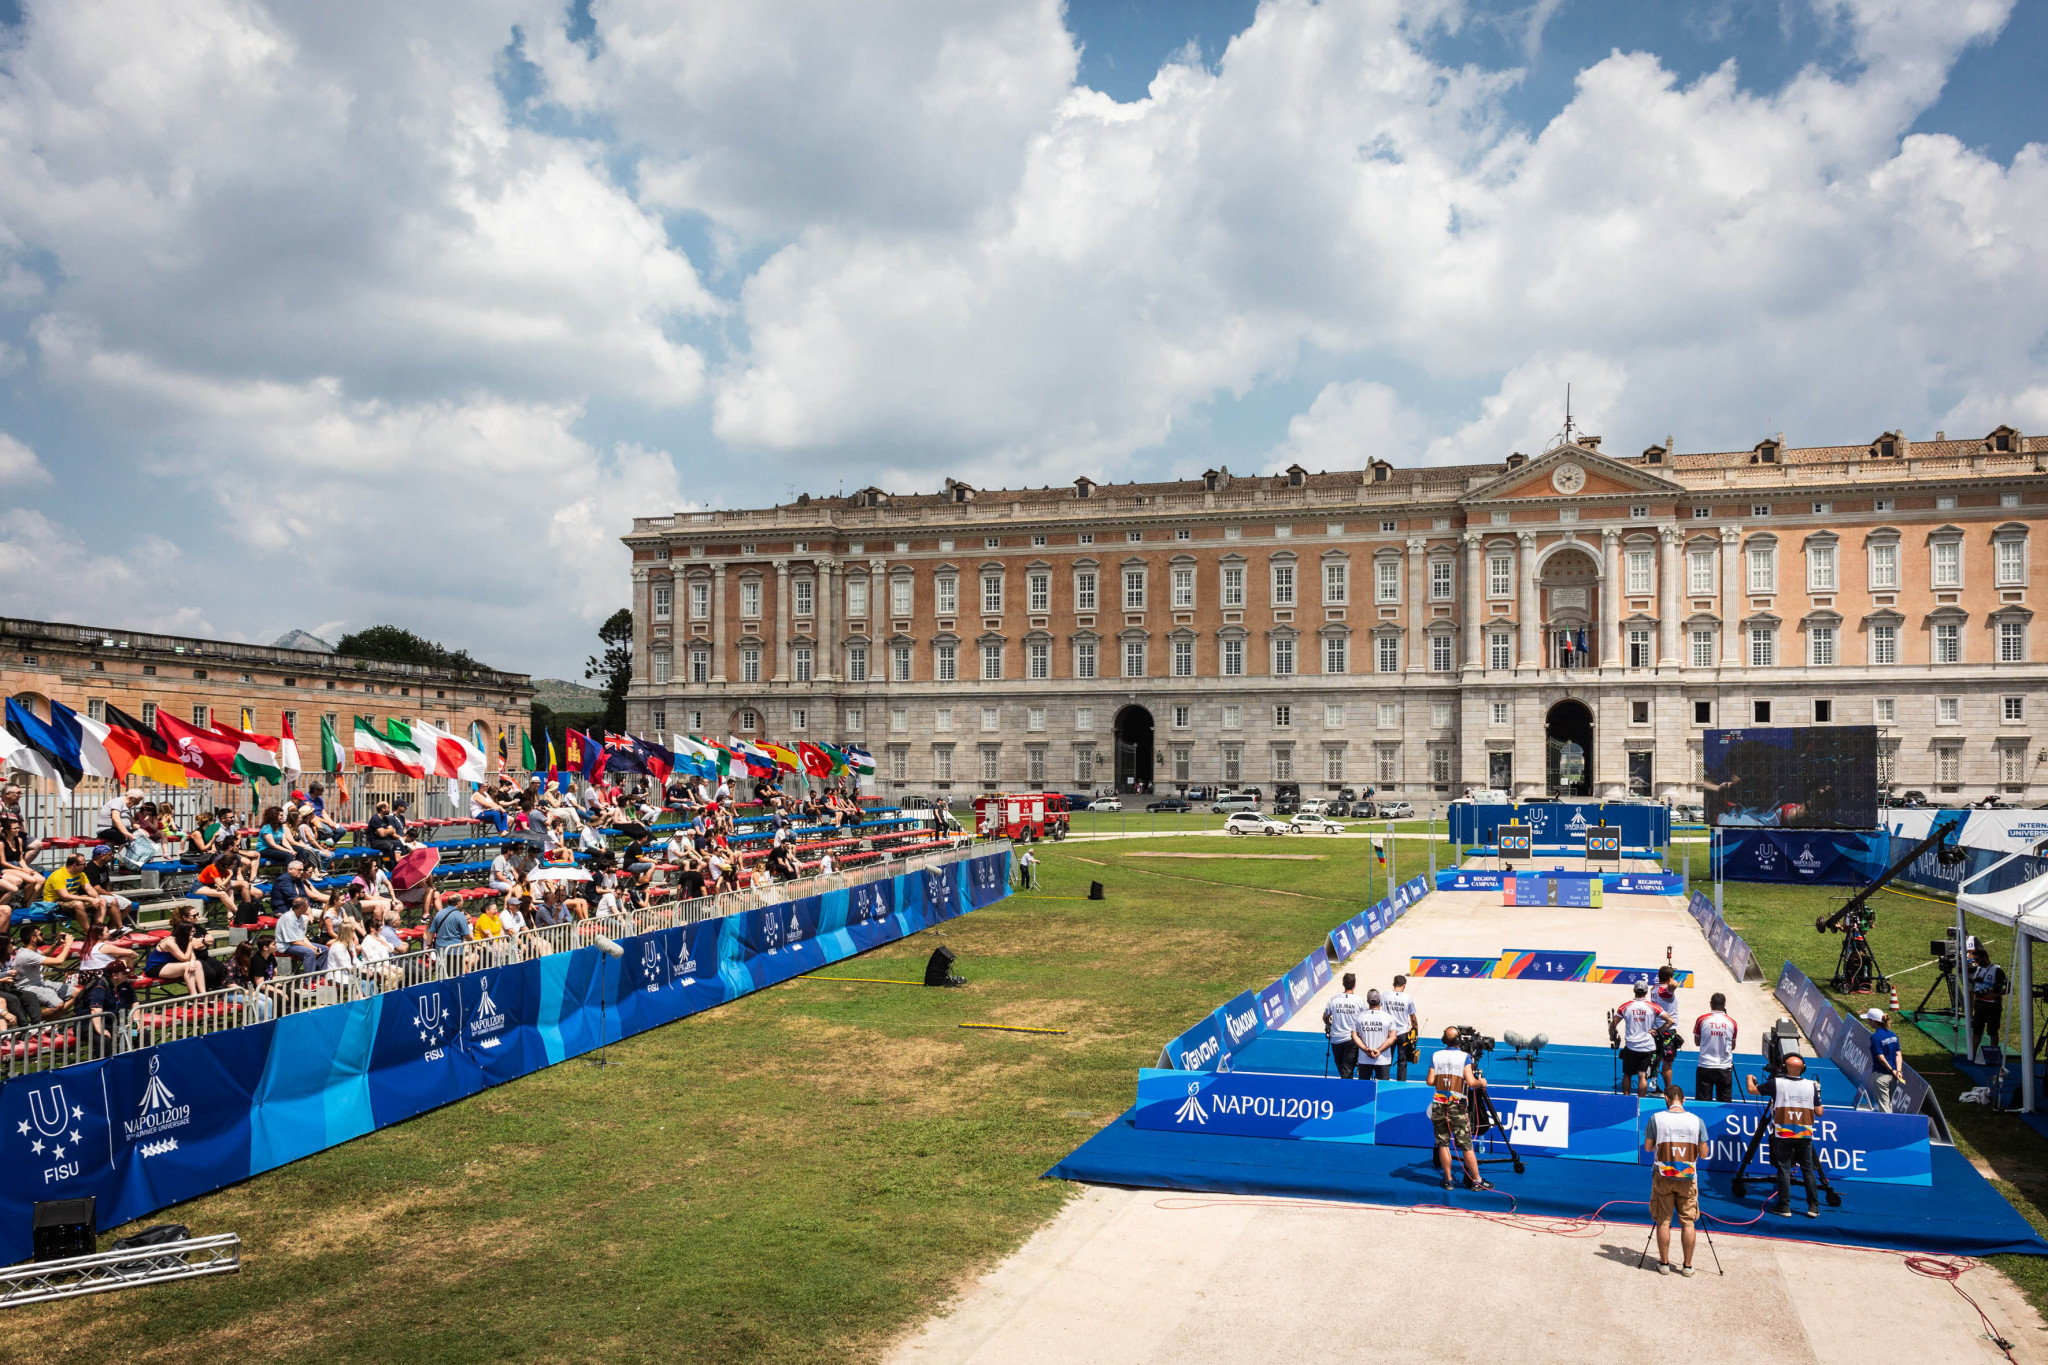 The elegant Royal Palace in Caserta was a fitting venue for the first archery finals ©Naples 2019